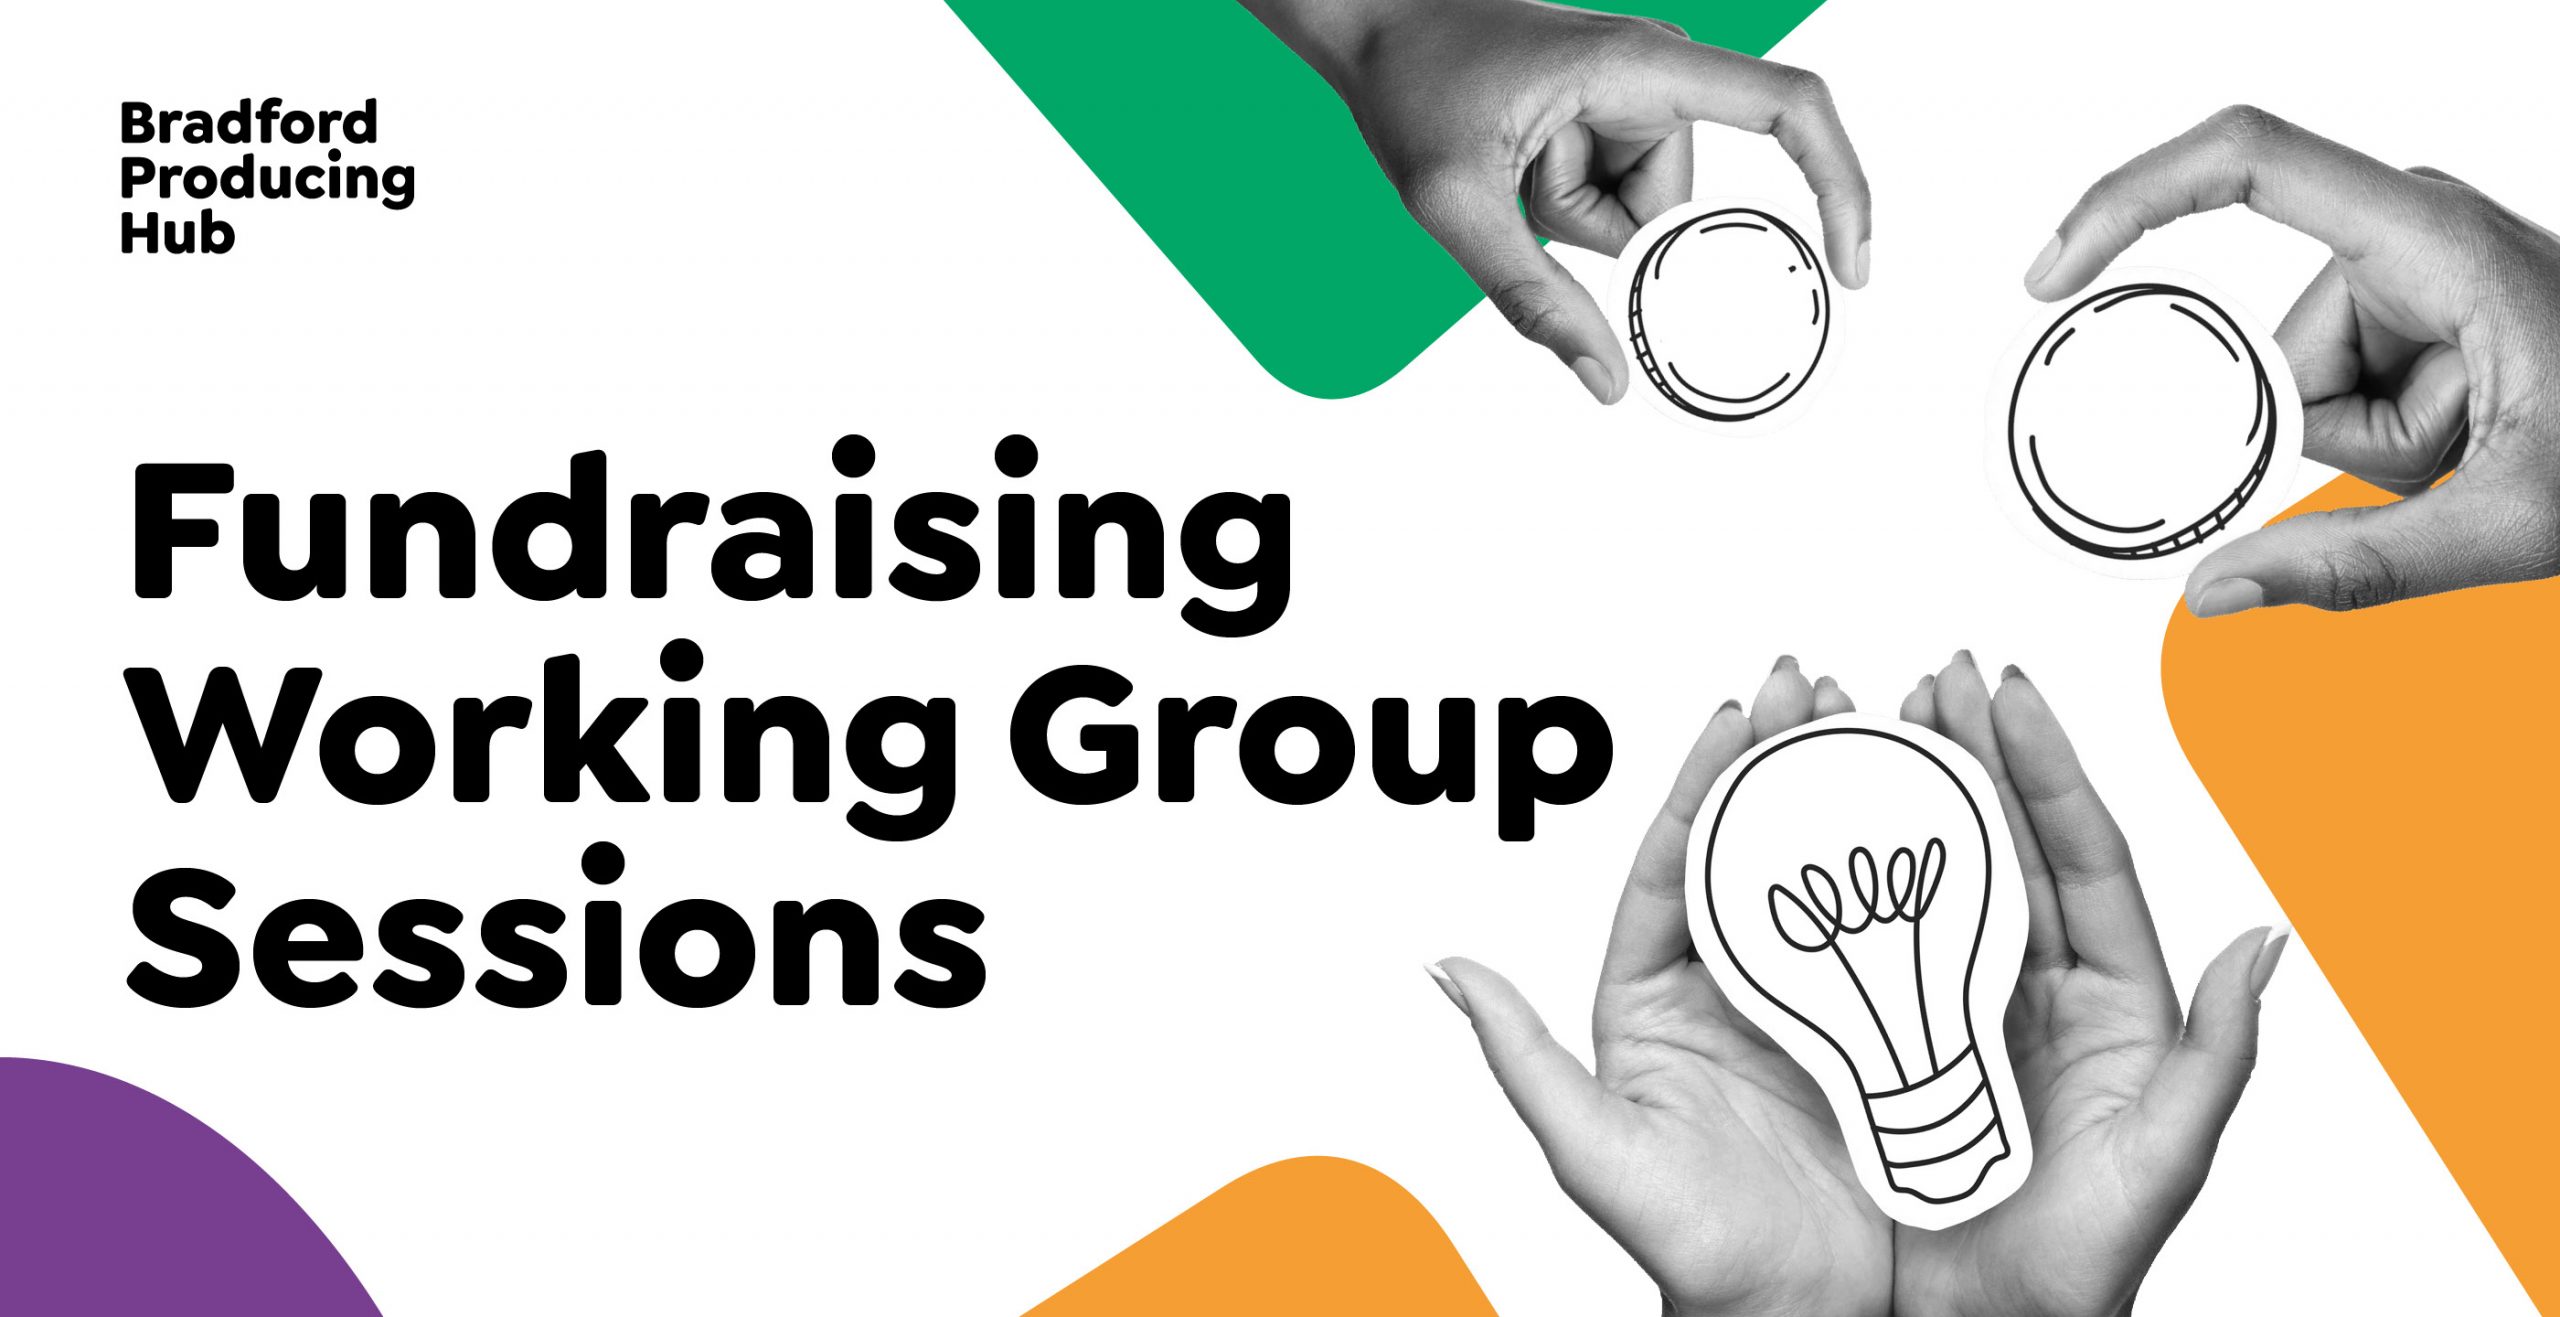 Fundraising Working Group Sessions